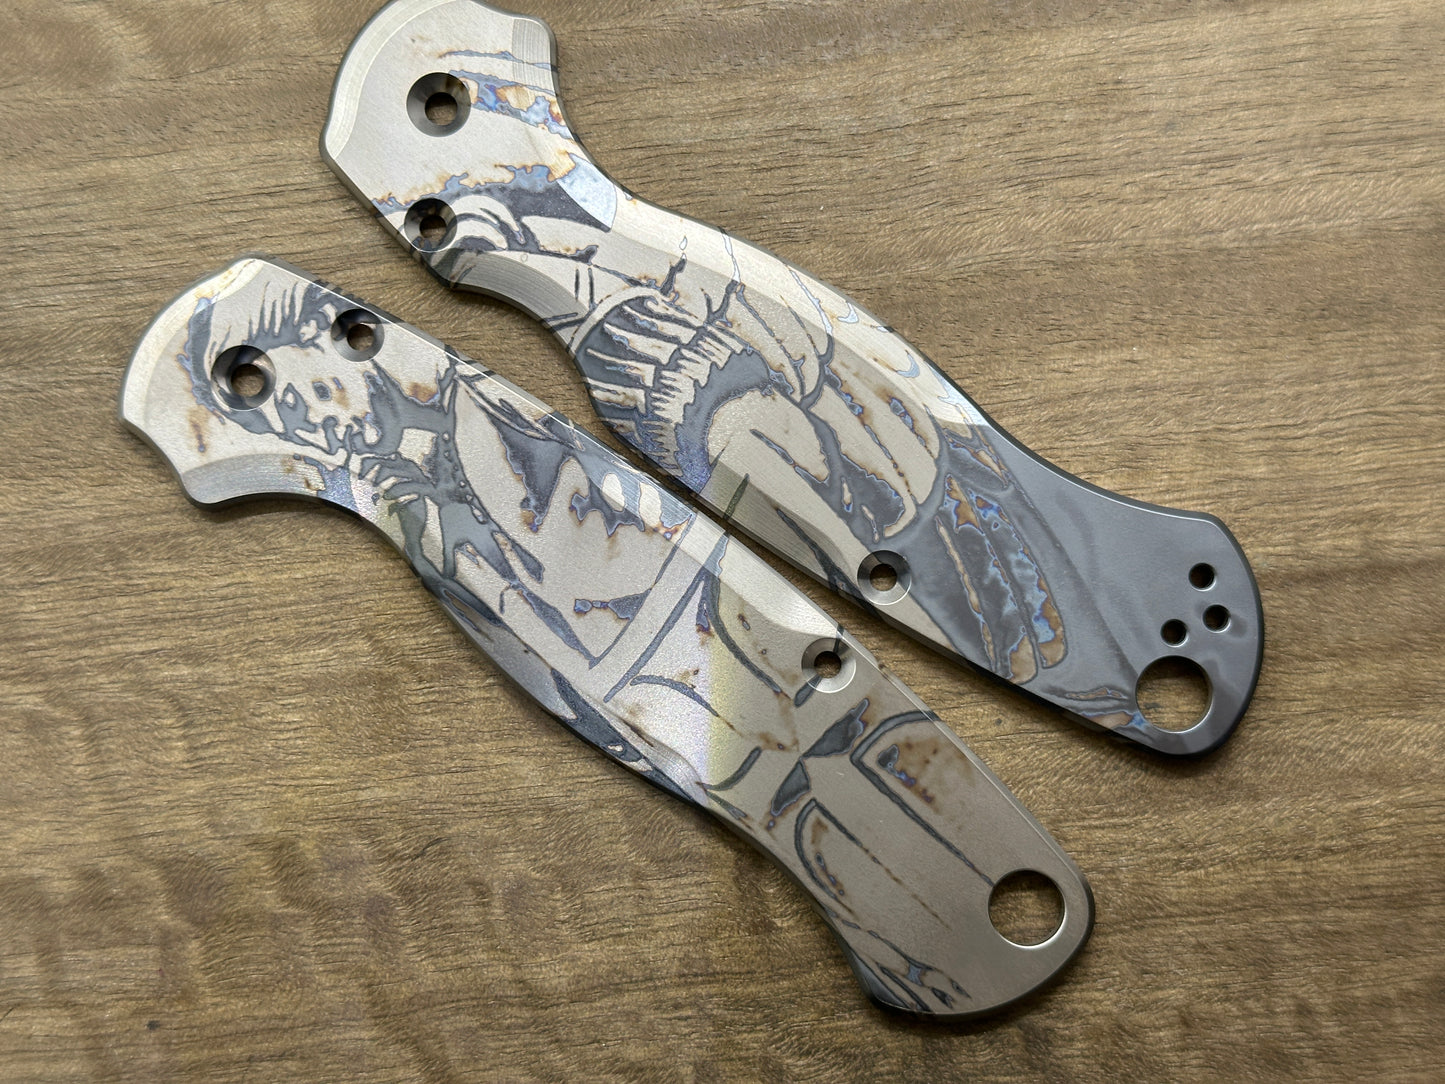 St. Michael the Archangel Titanium scales for Spyderco Paramilitary 2 PM2